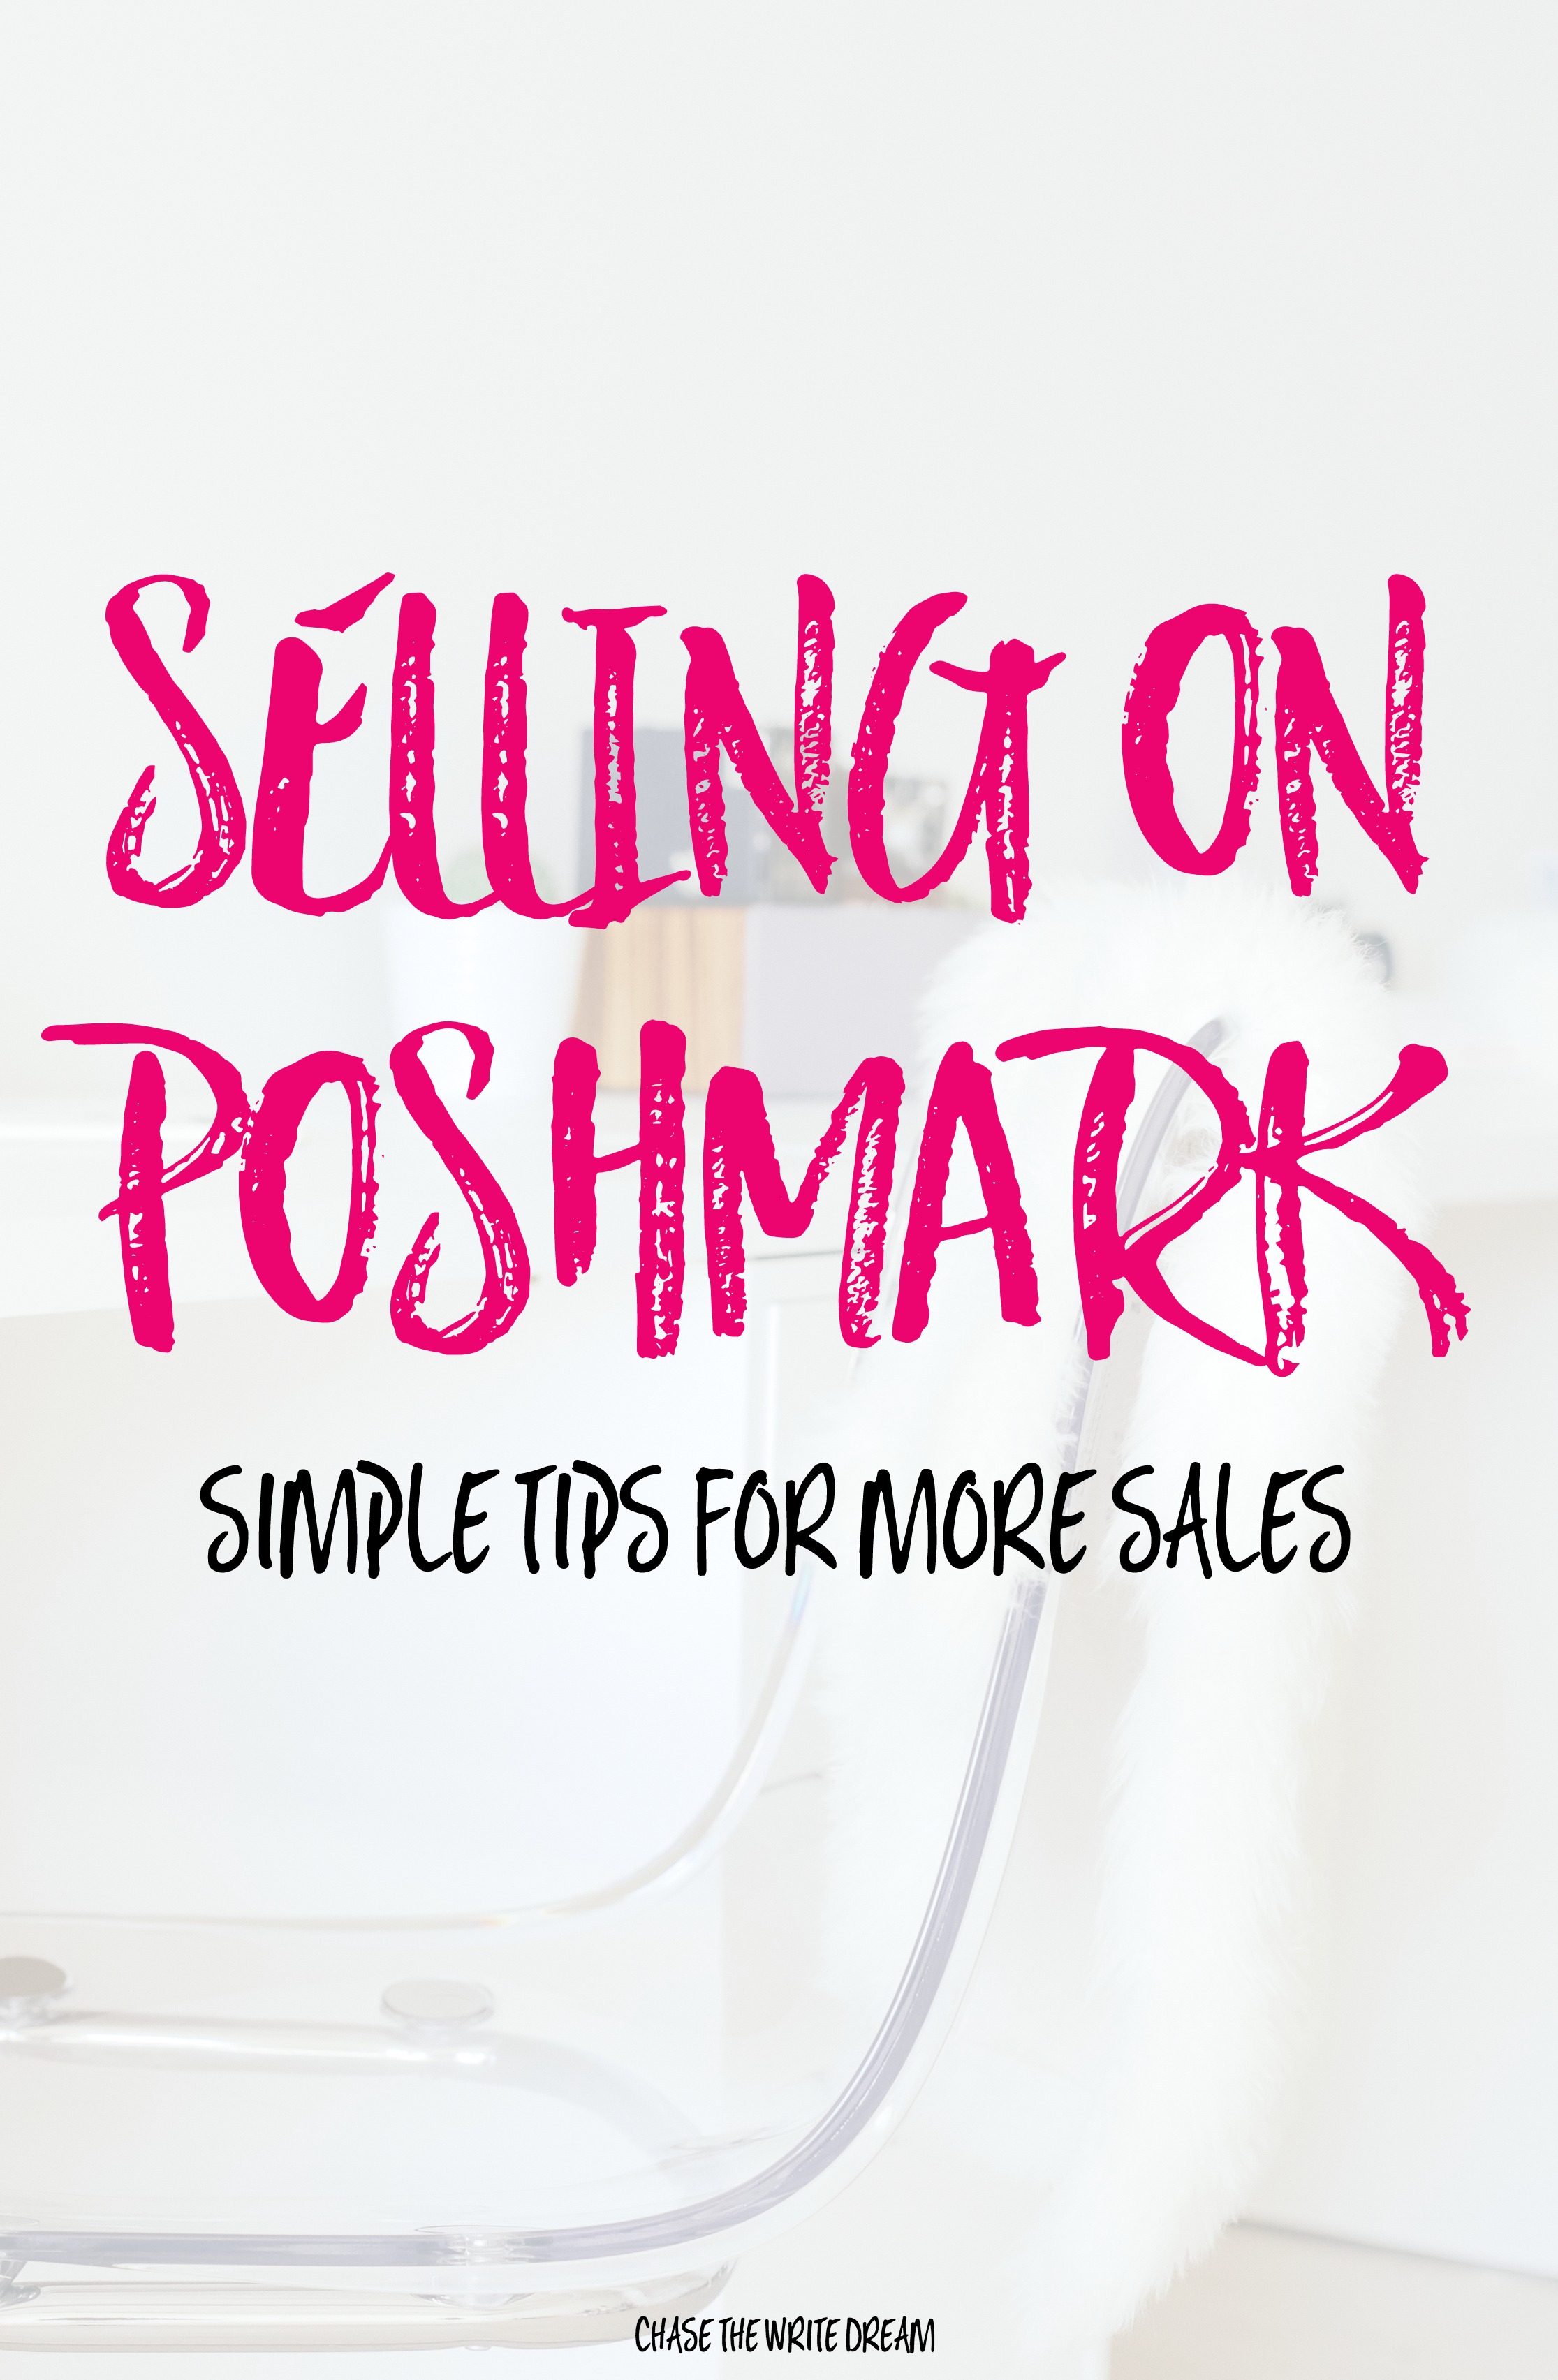 Poshmark, The Mobile Marketplace For Women To Sell And 